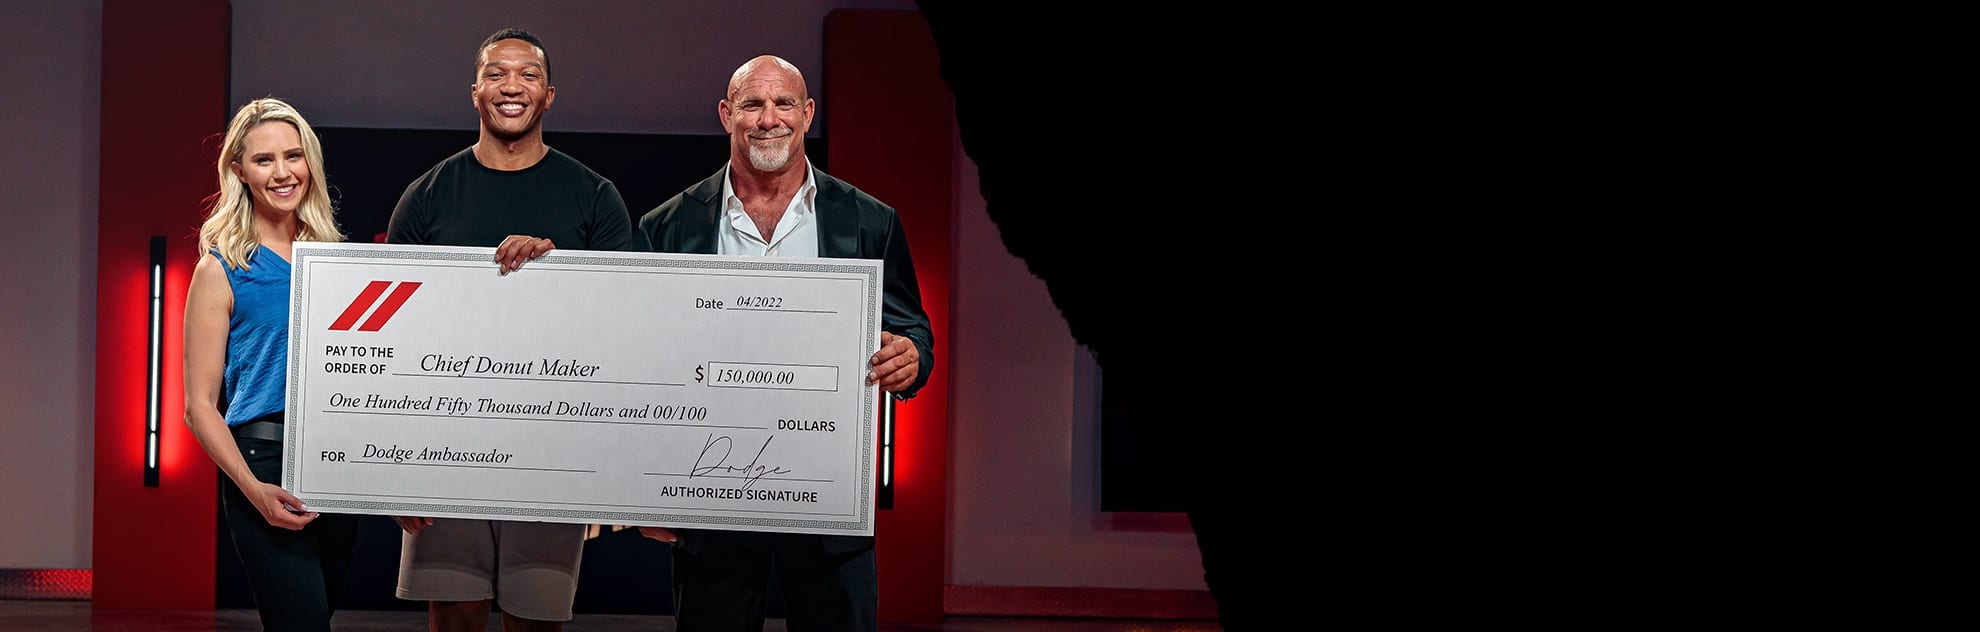 Katie Osborne—Dodge Host, Preston Patterson—Chief Donut Maker Winner and Bill Goldberg—Championship Wrestler, all smiling, holding a jumbo check for $150,000 made payable to the Chief Donut Maker and signed by Dodge.